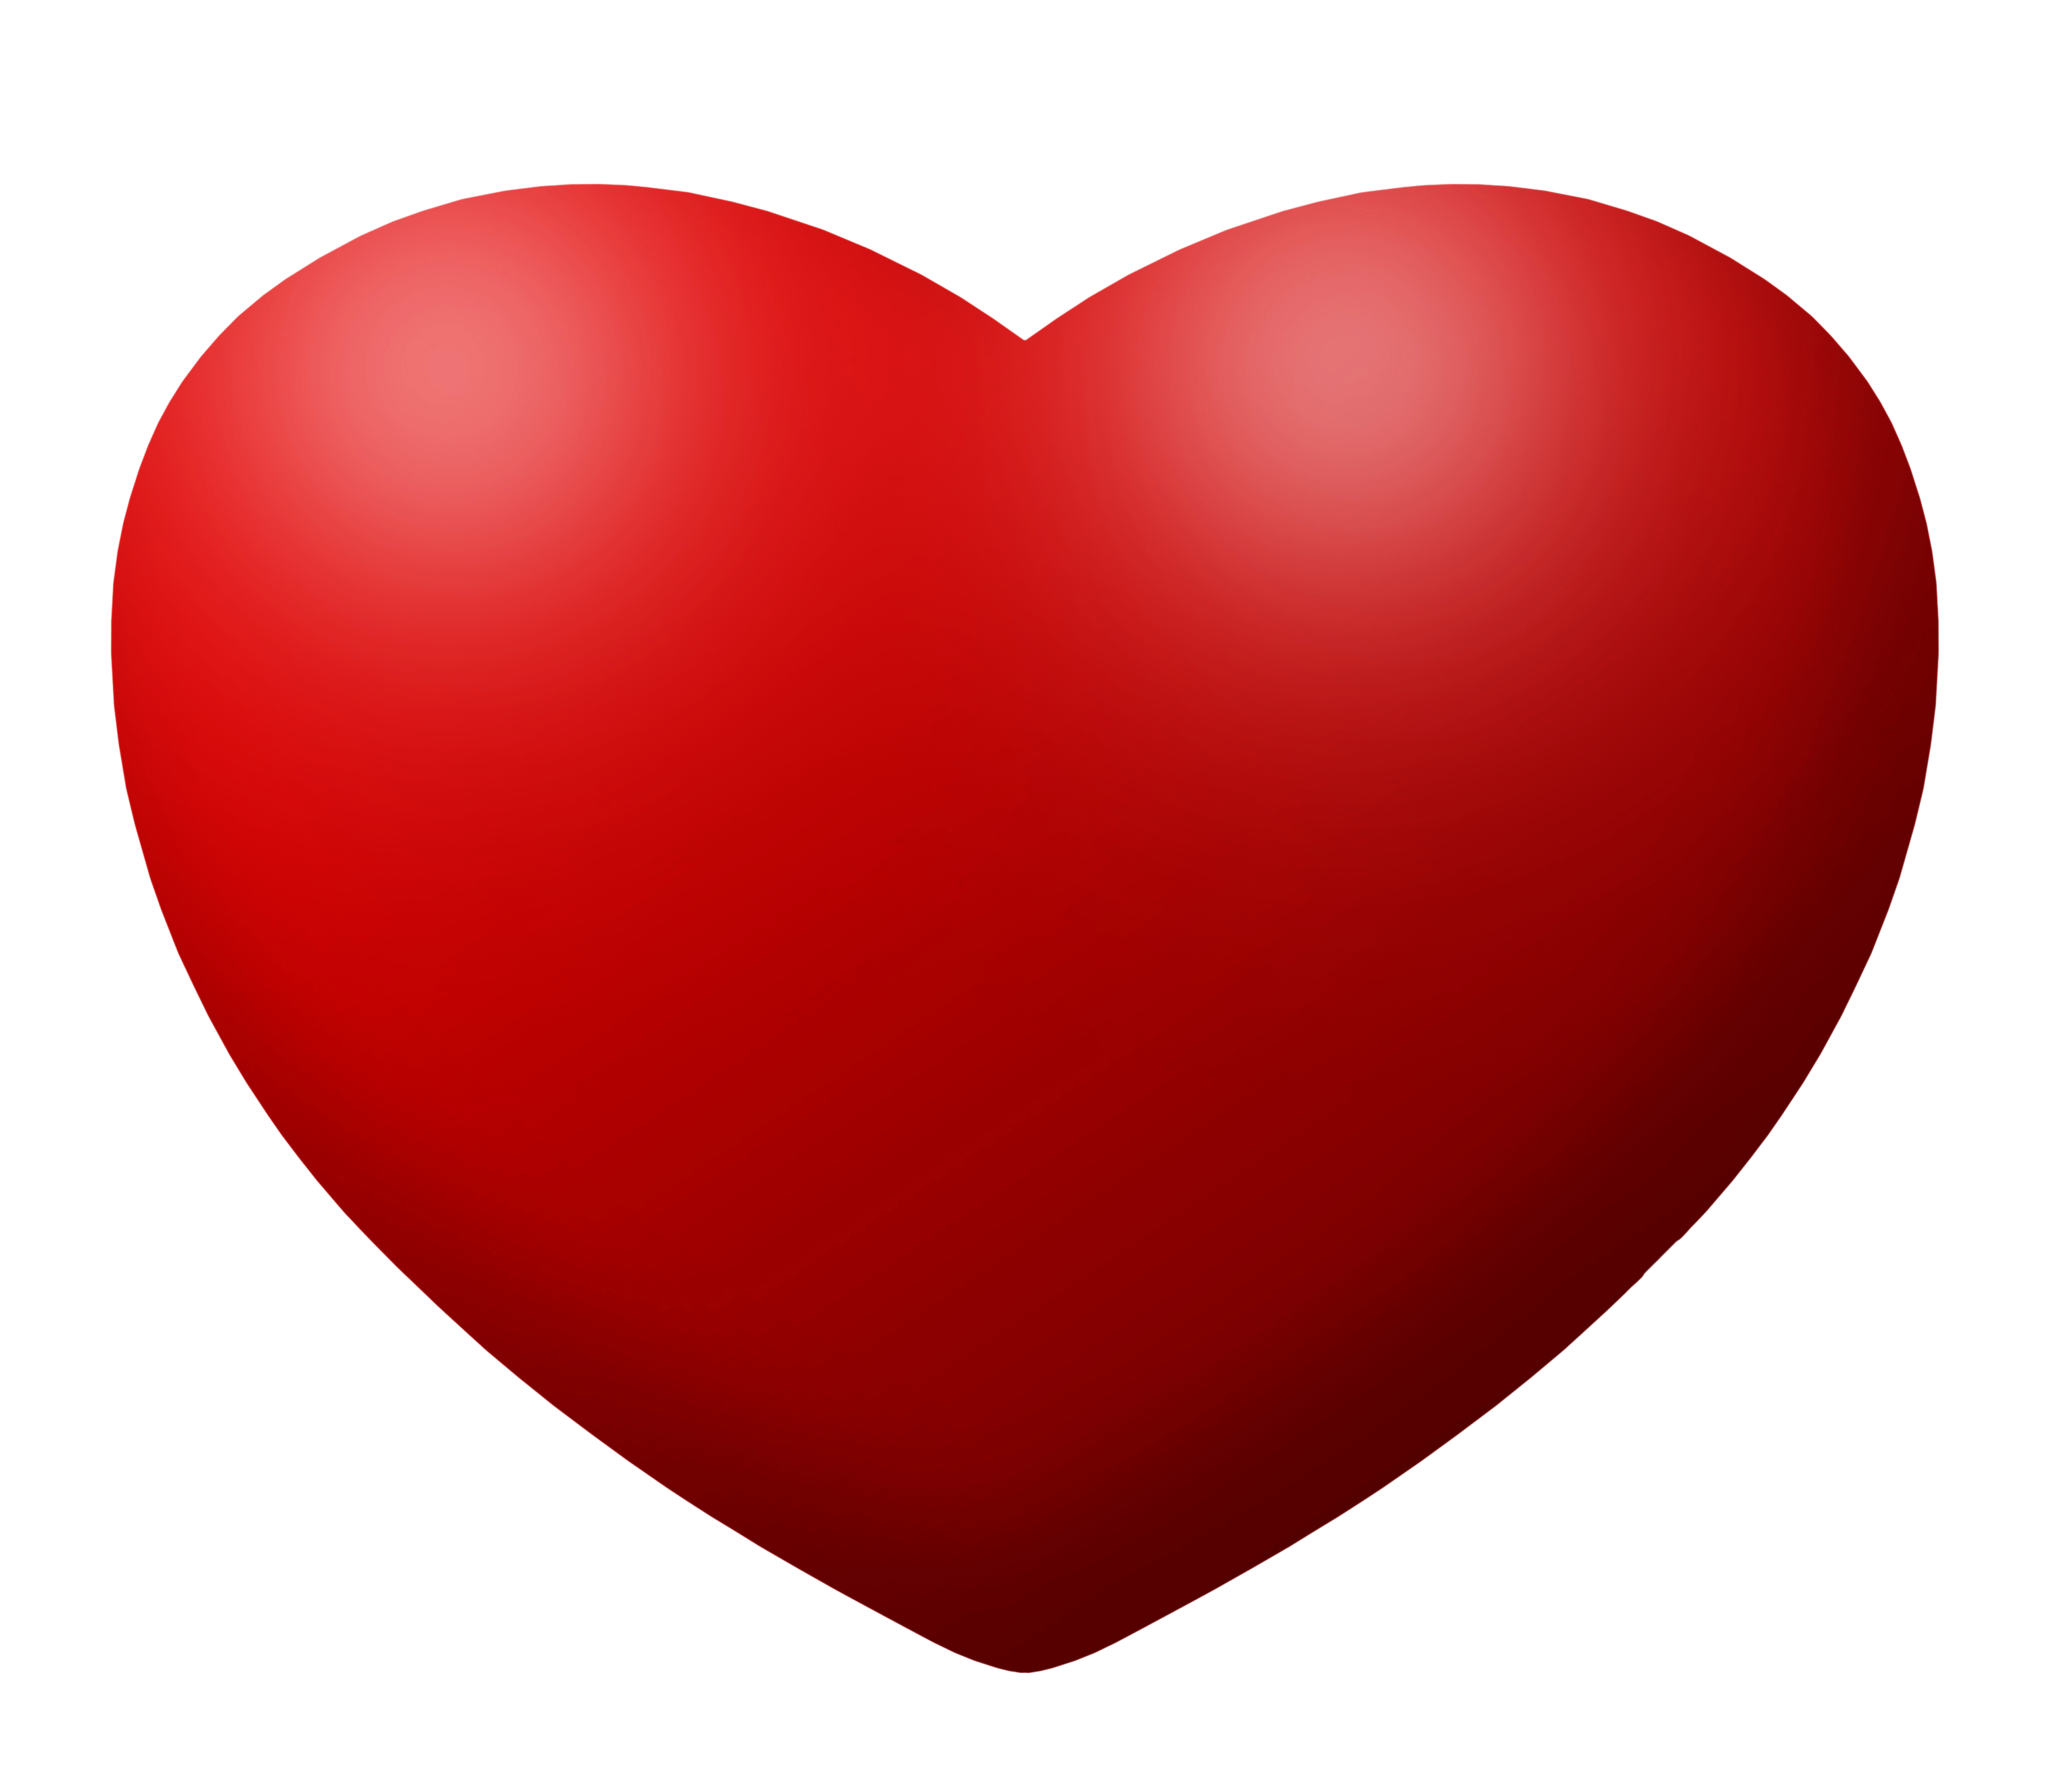 Heart Images For Free Download - ClipArt Best